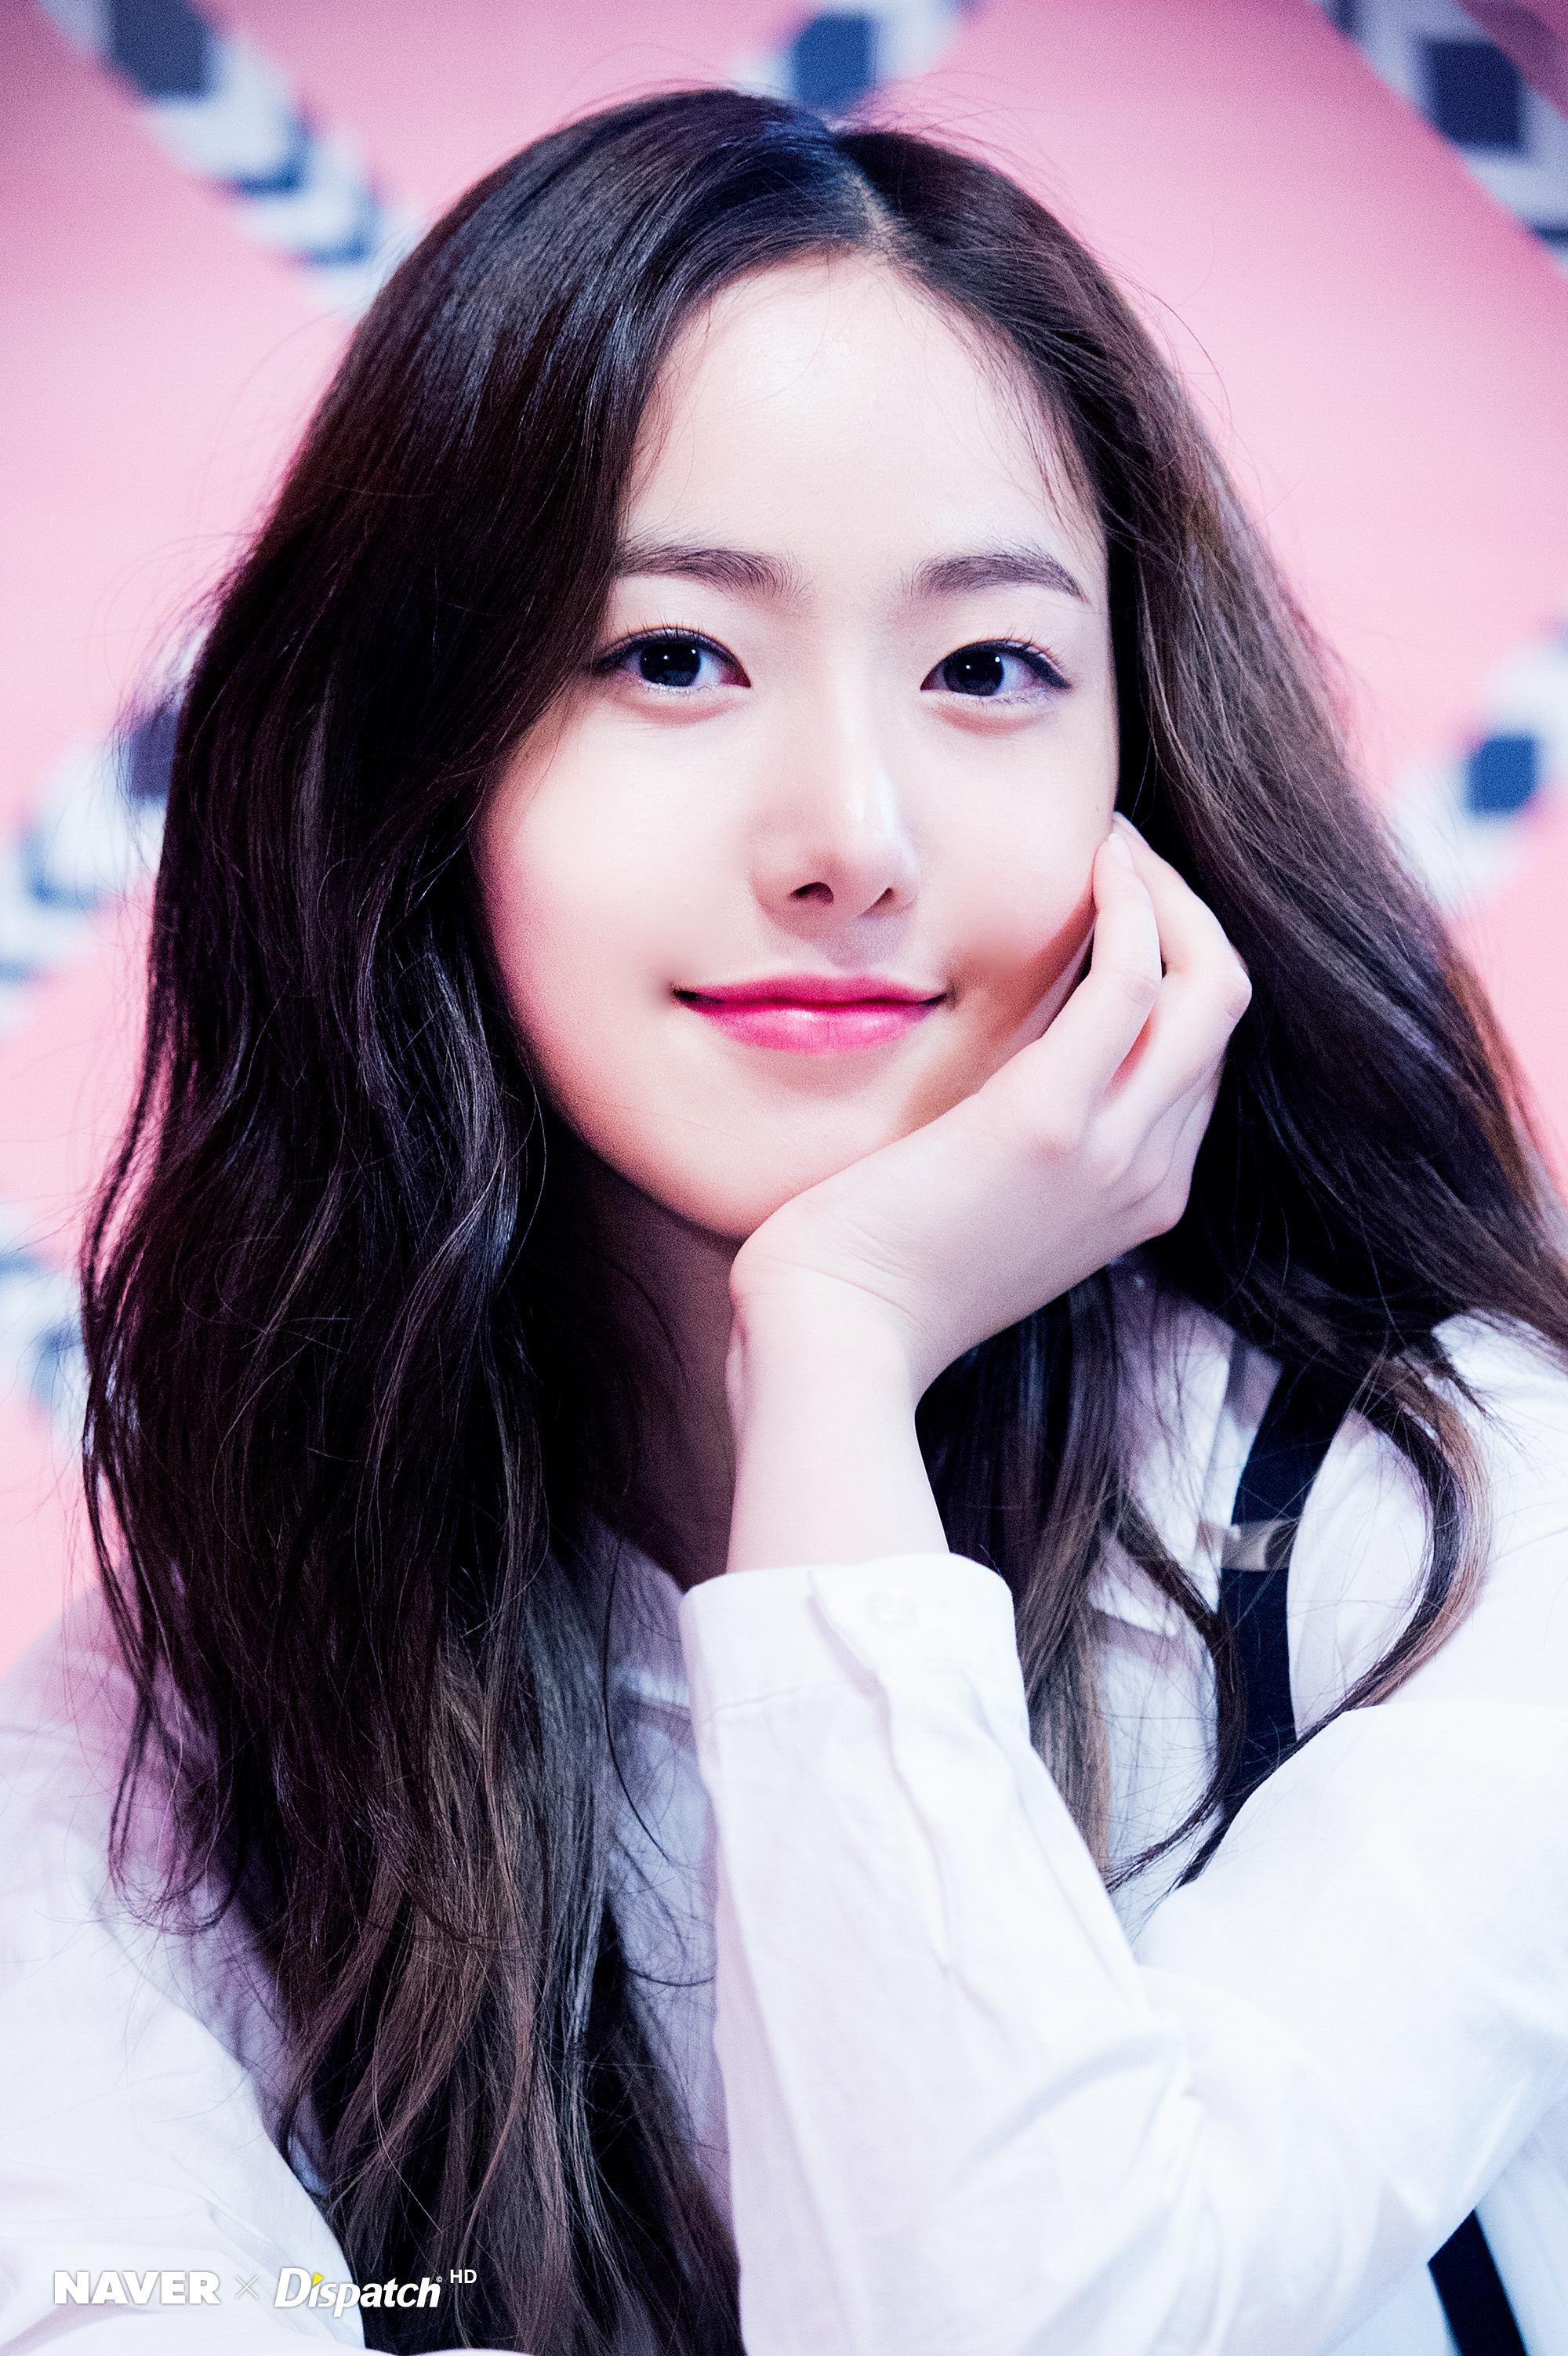 SinB Android IPhone Wallpaper KPOP Image